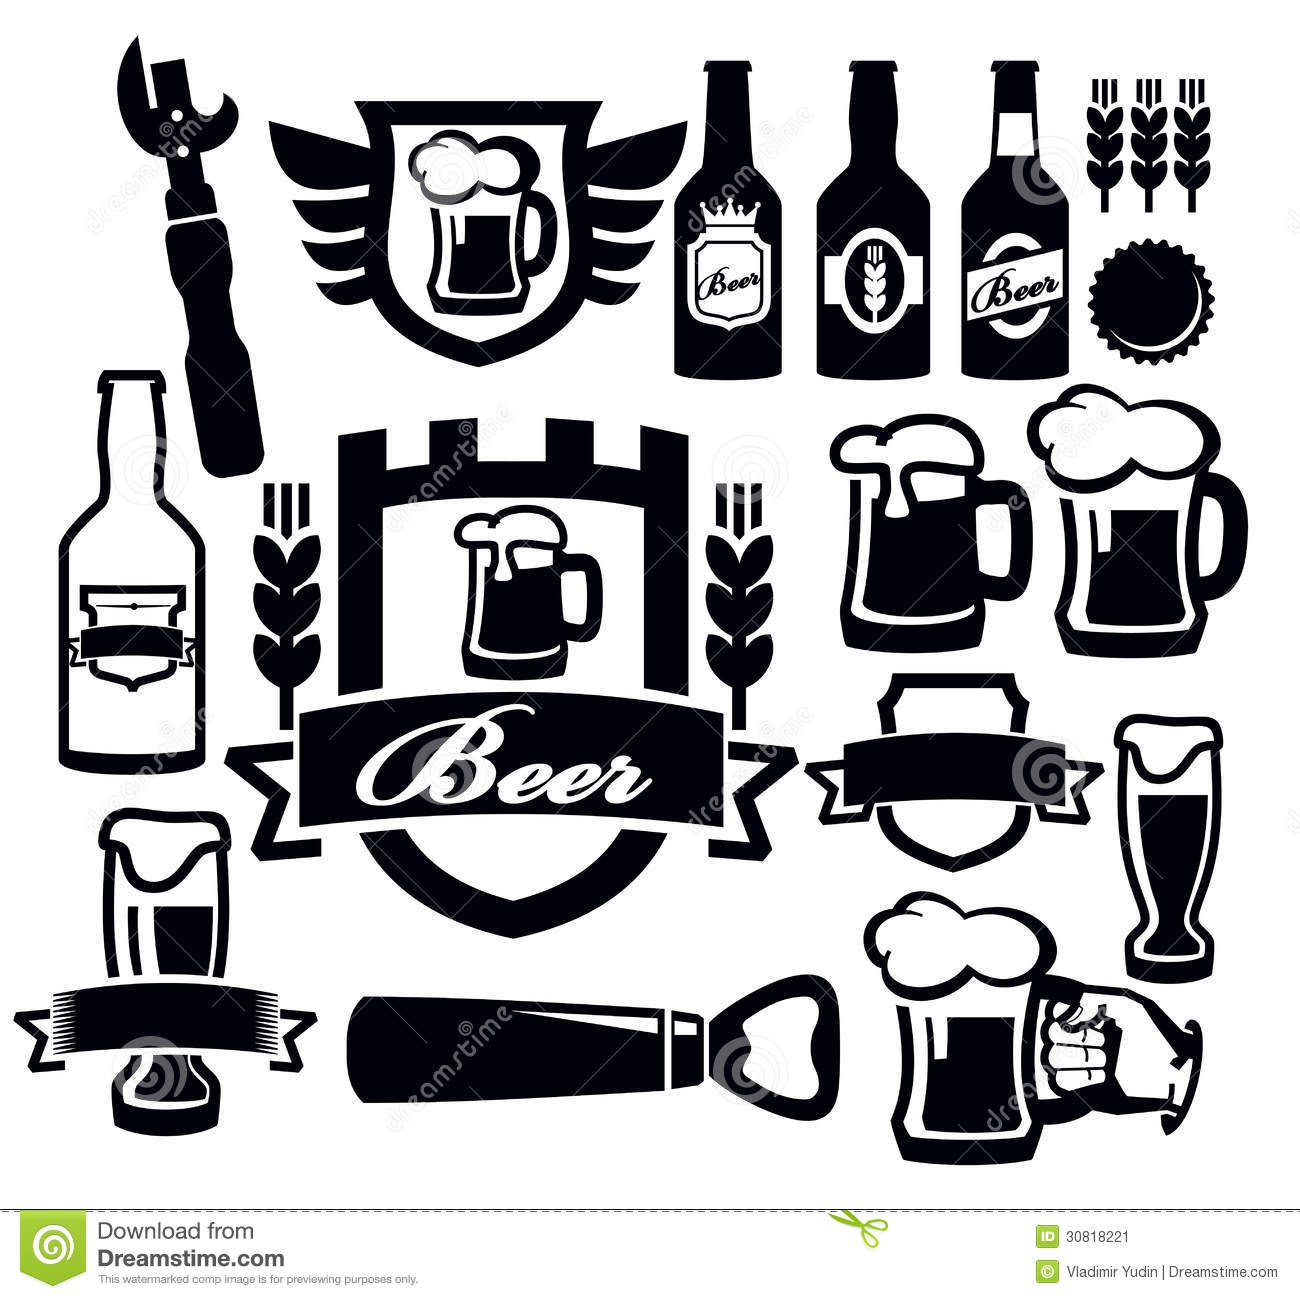 Beer Icon Stock Image   Image  30818221